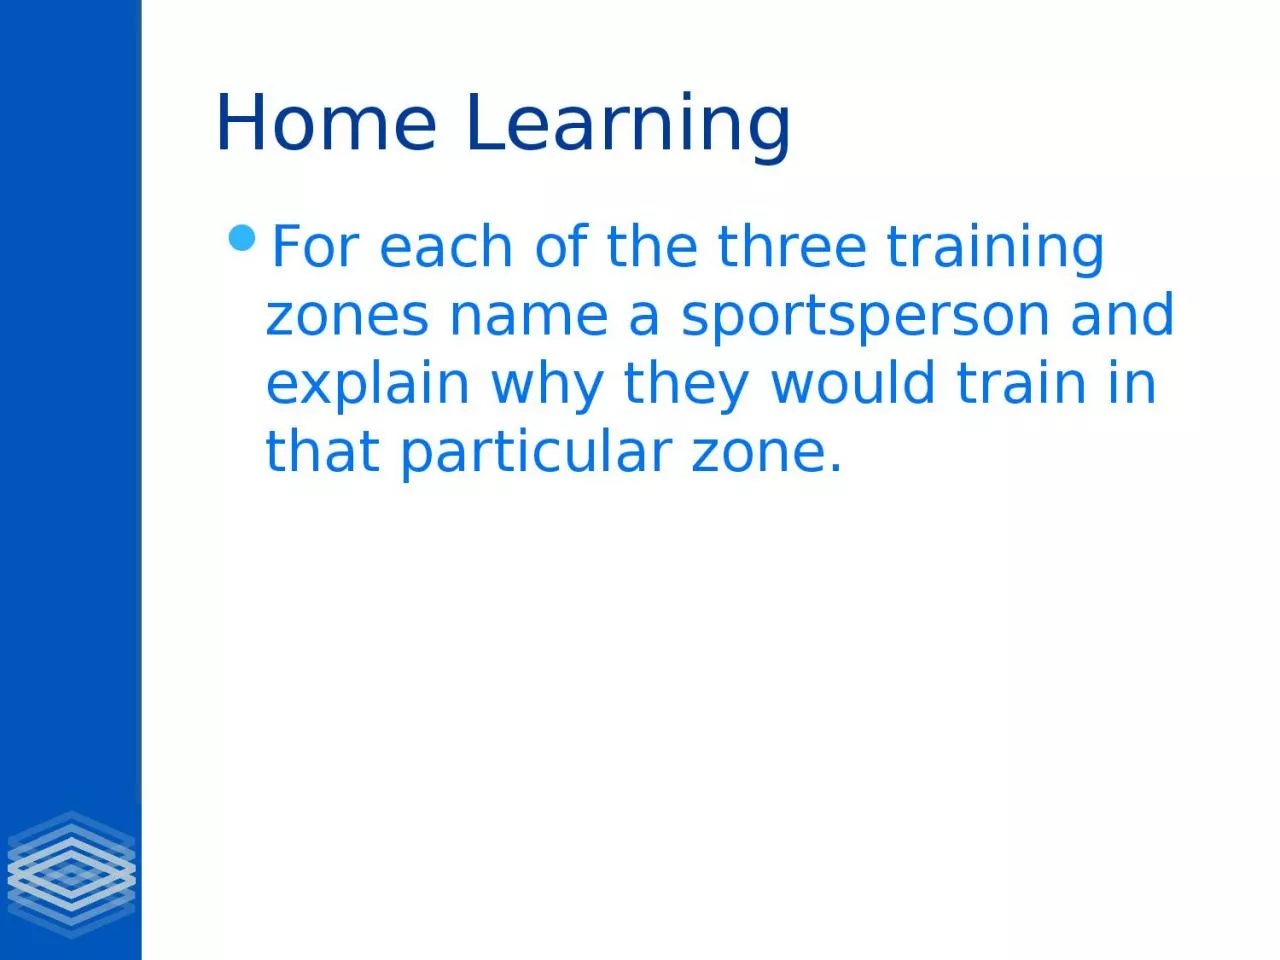 Home Learning For each of the three training zones name a sportsperson and explain why